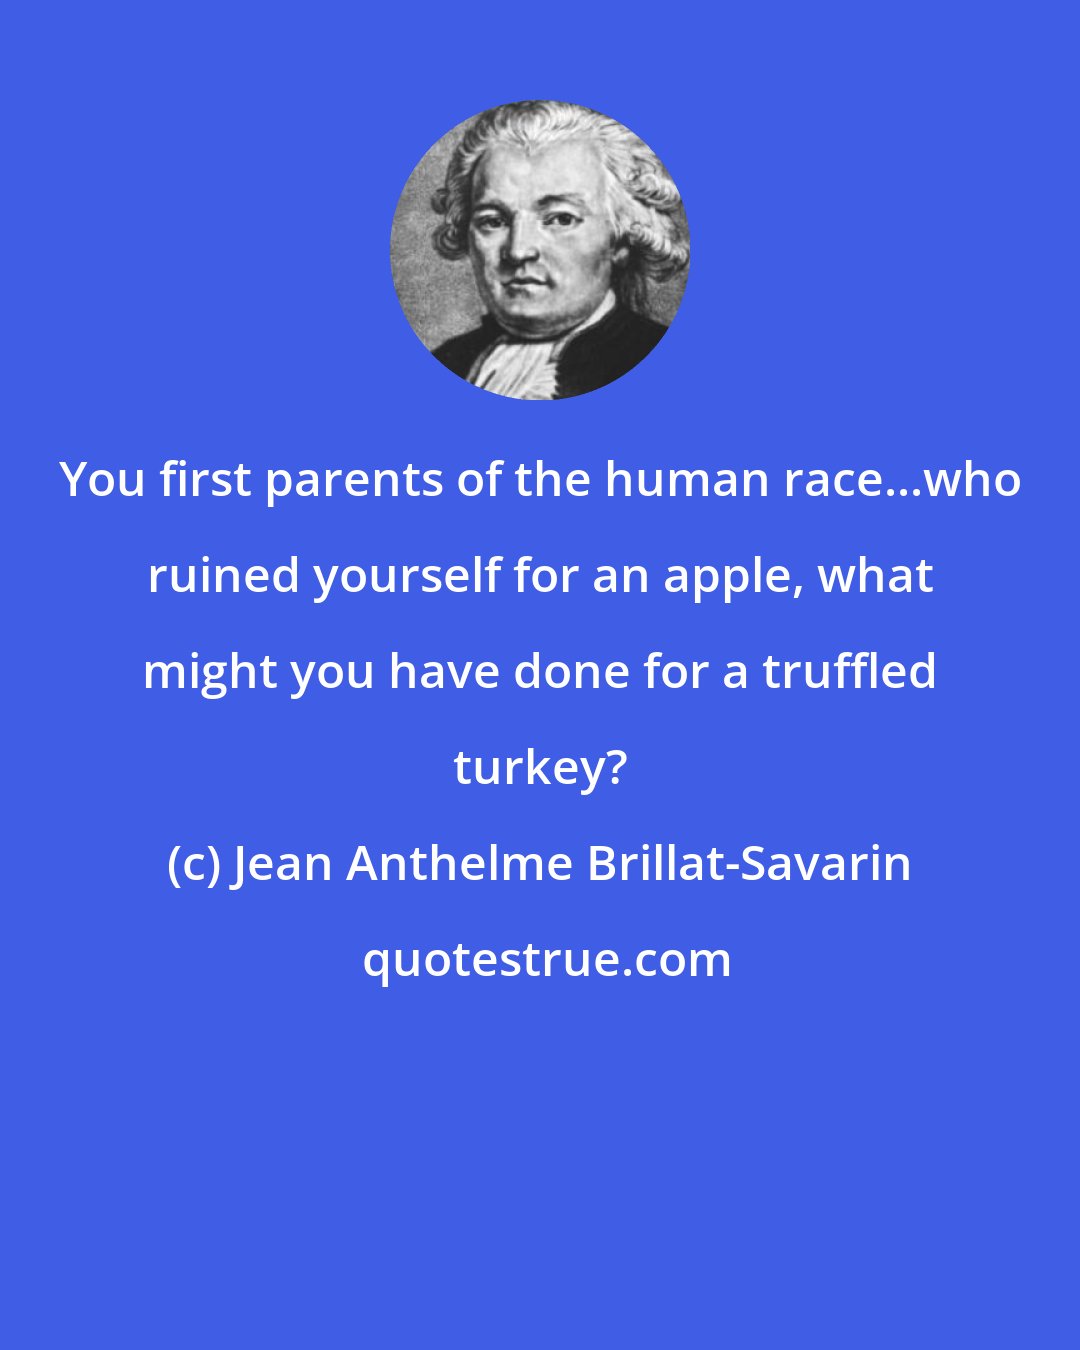 Jean Anthelme Brillat-Savarin: You first parents of the human race...who ruined yourself for an apple, what might you have done for a truffled turkey?